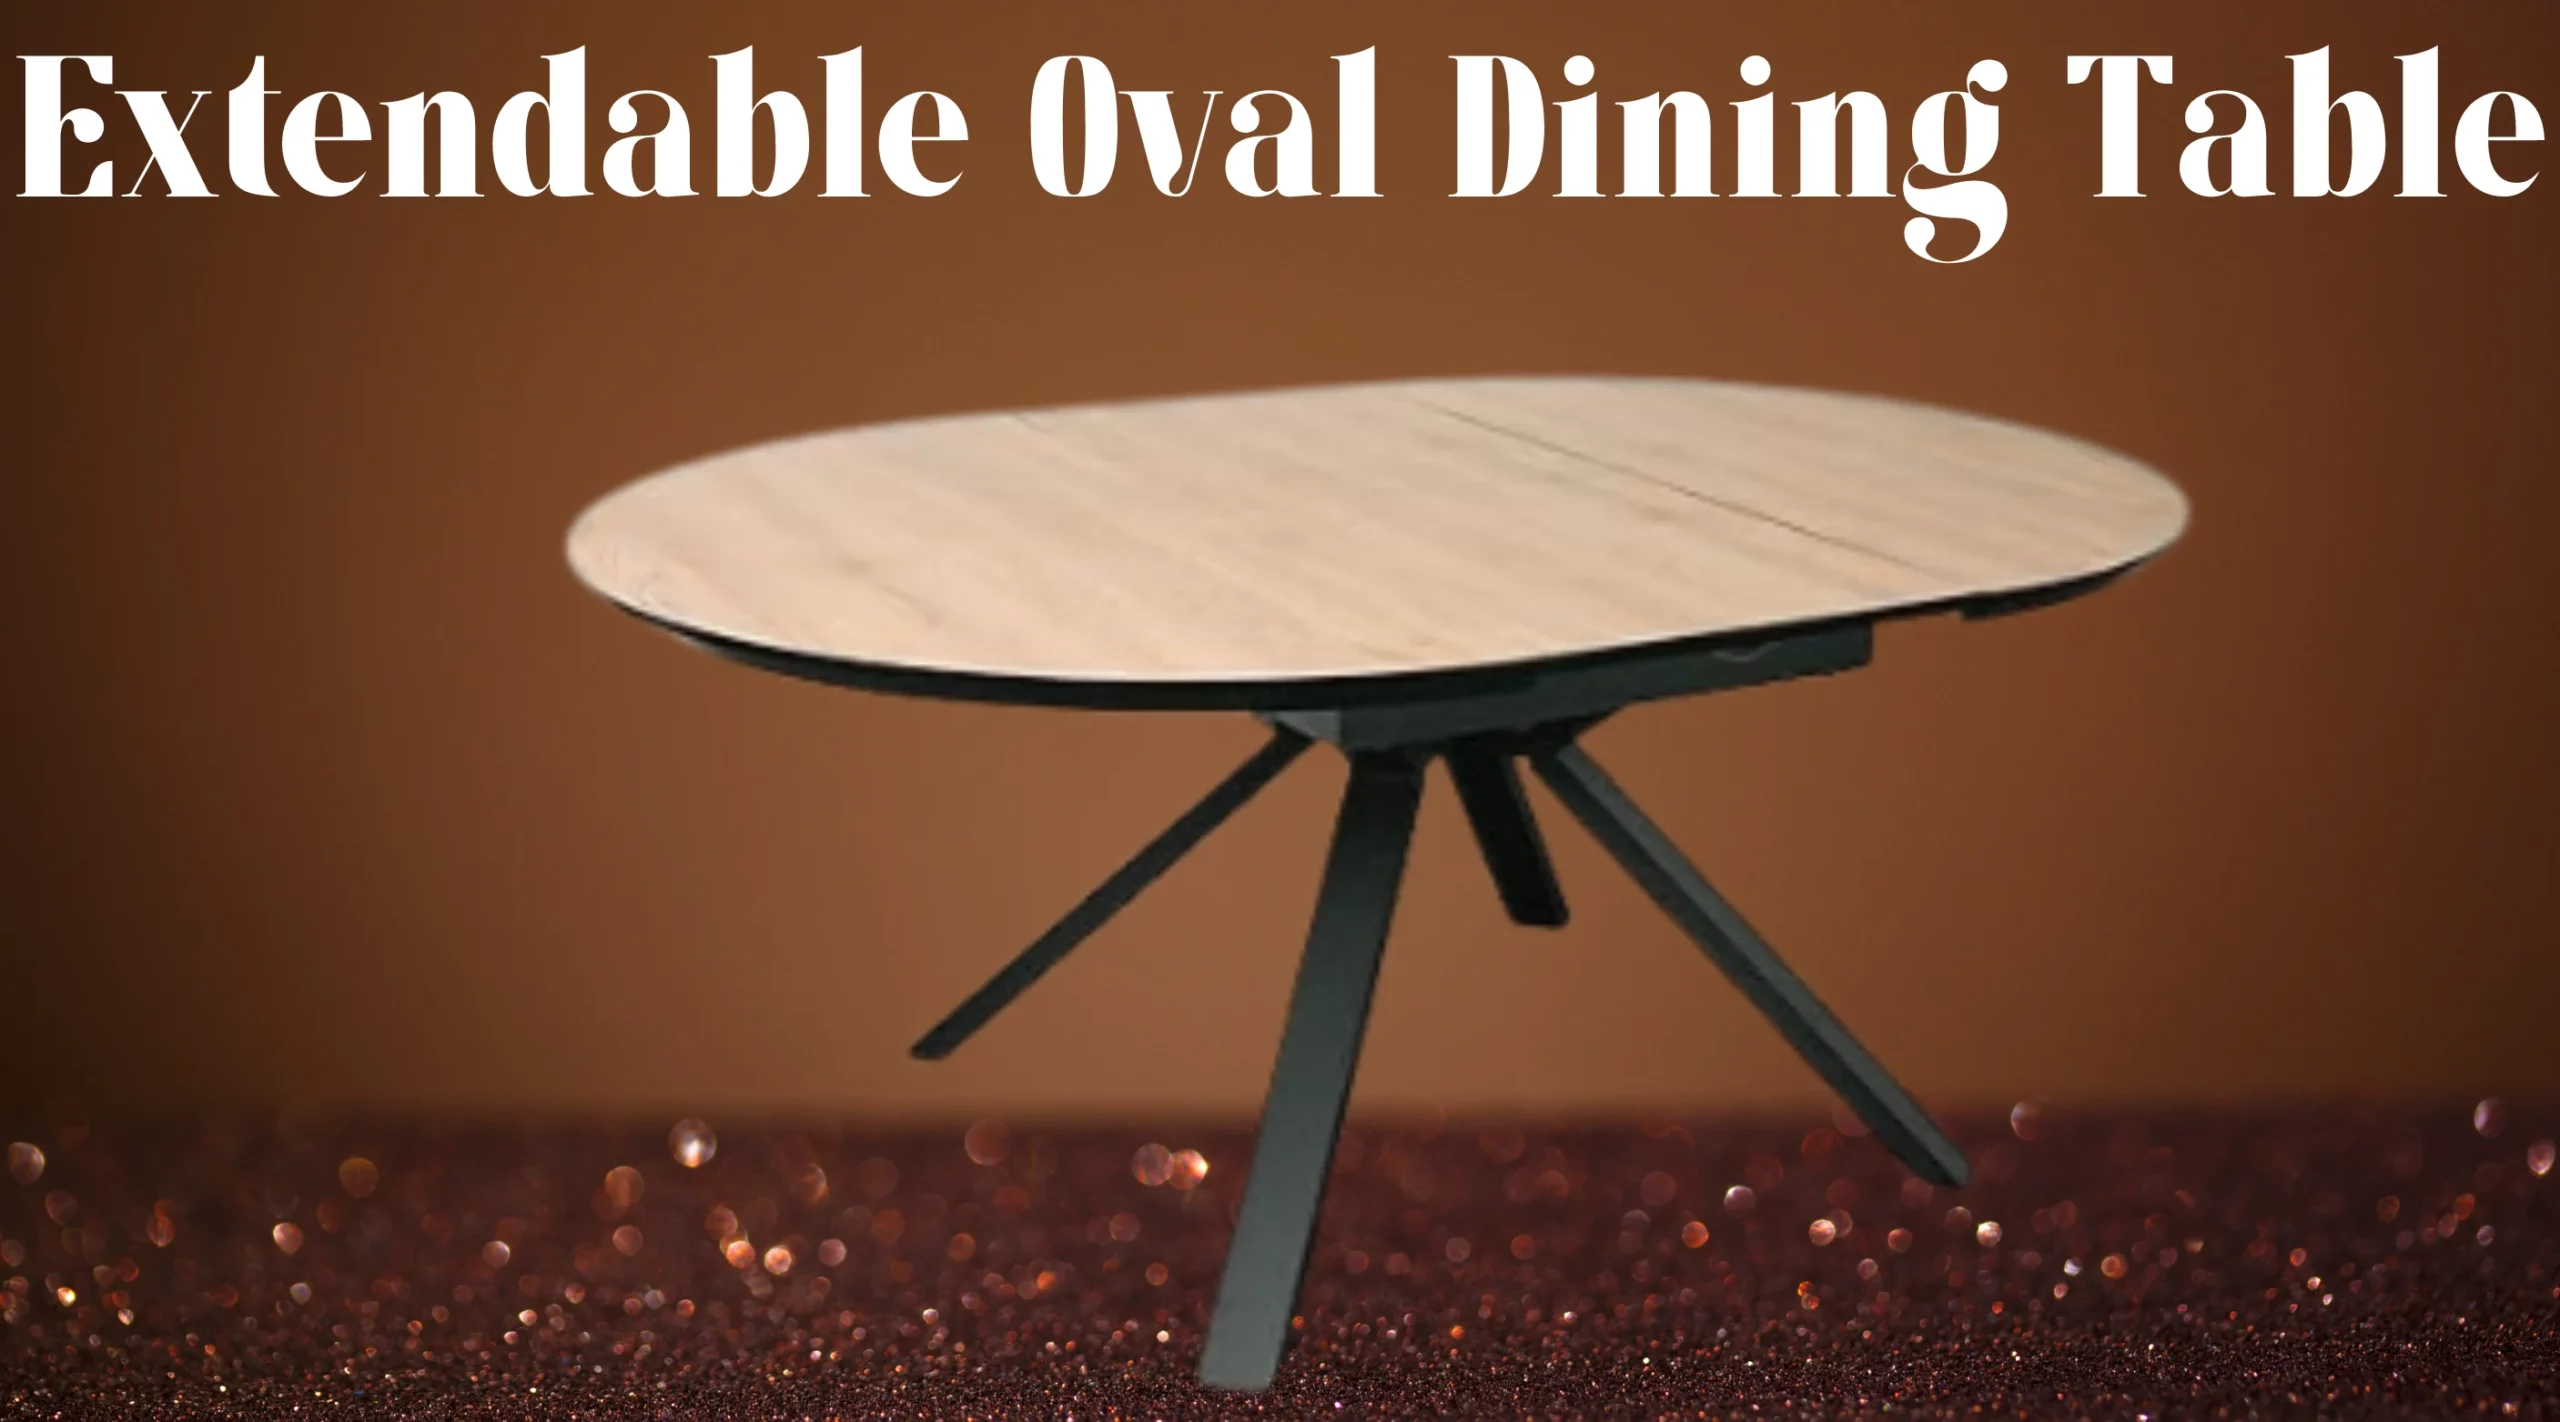 Extendable Oval Dining Table